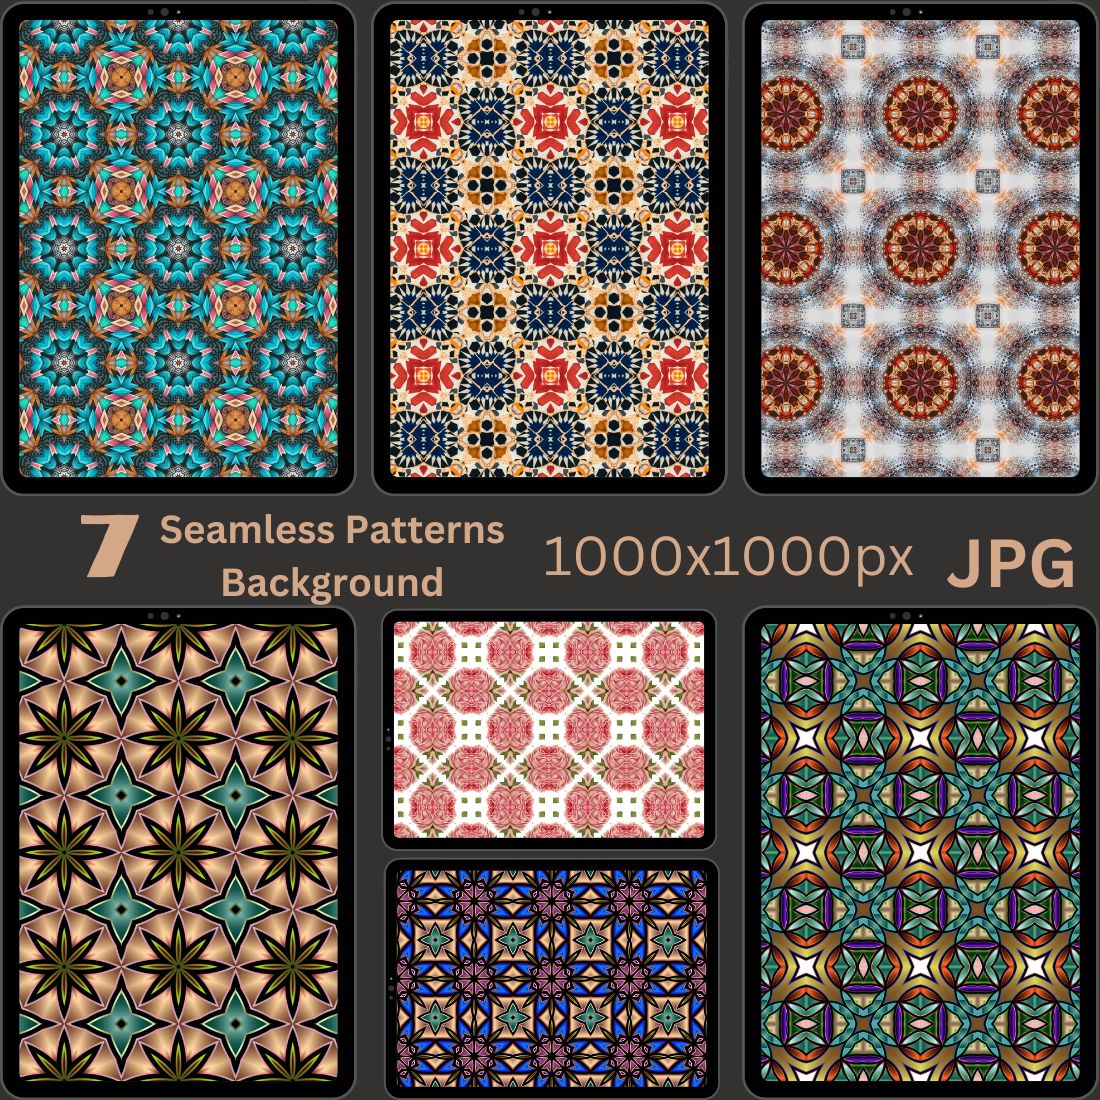 7 Seamless Patterns Background - main image preview.